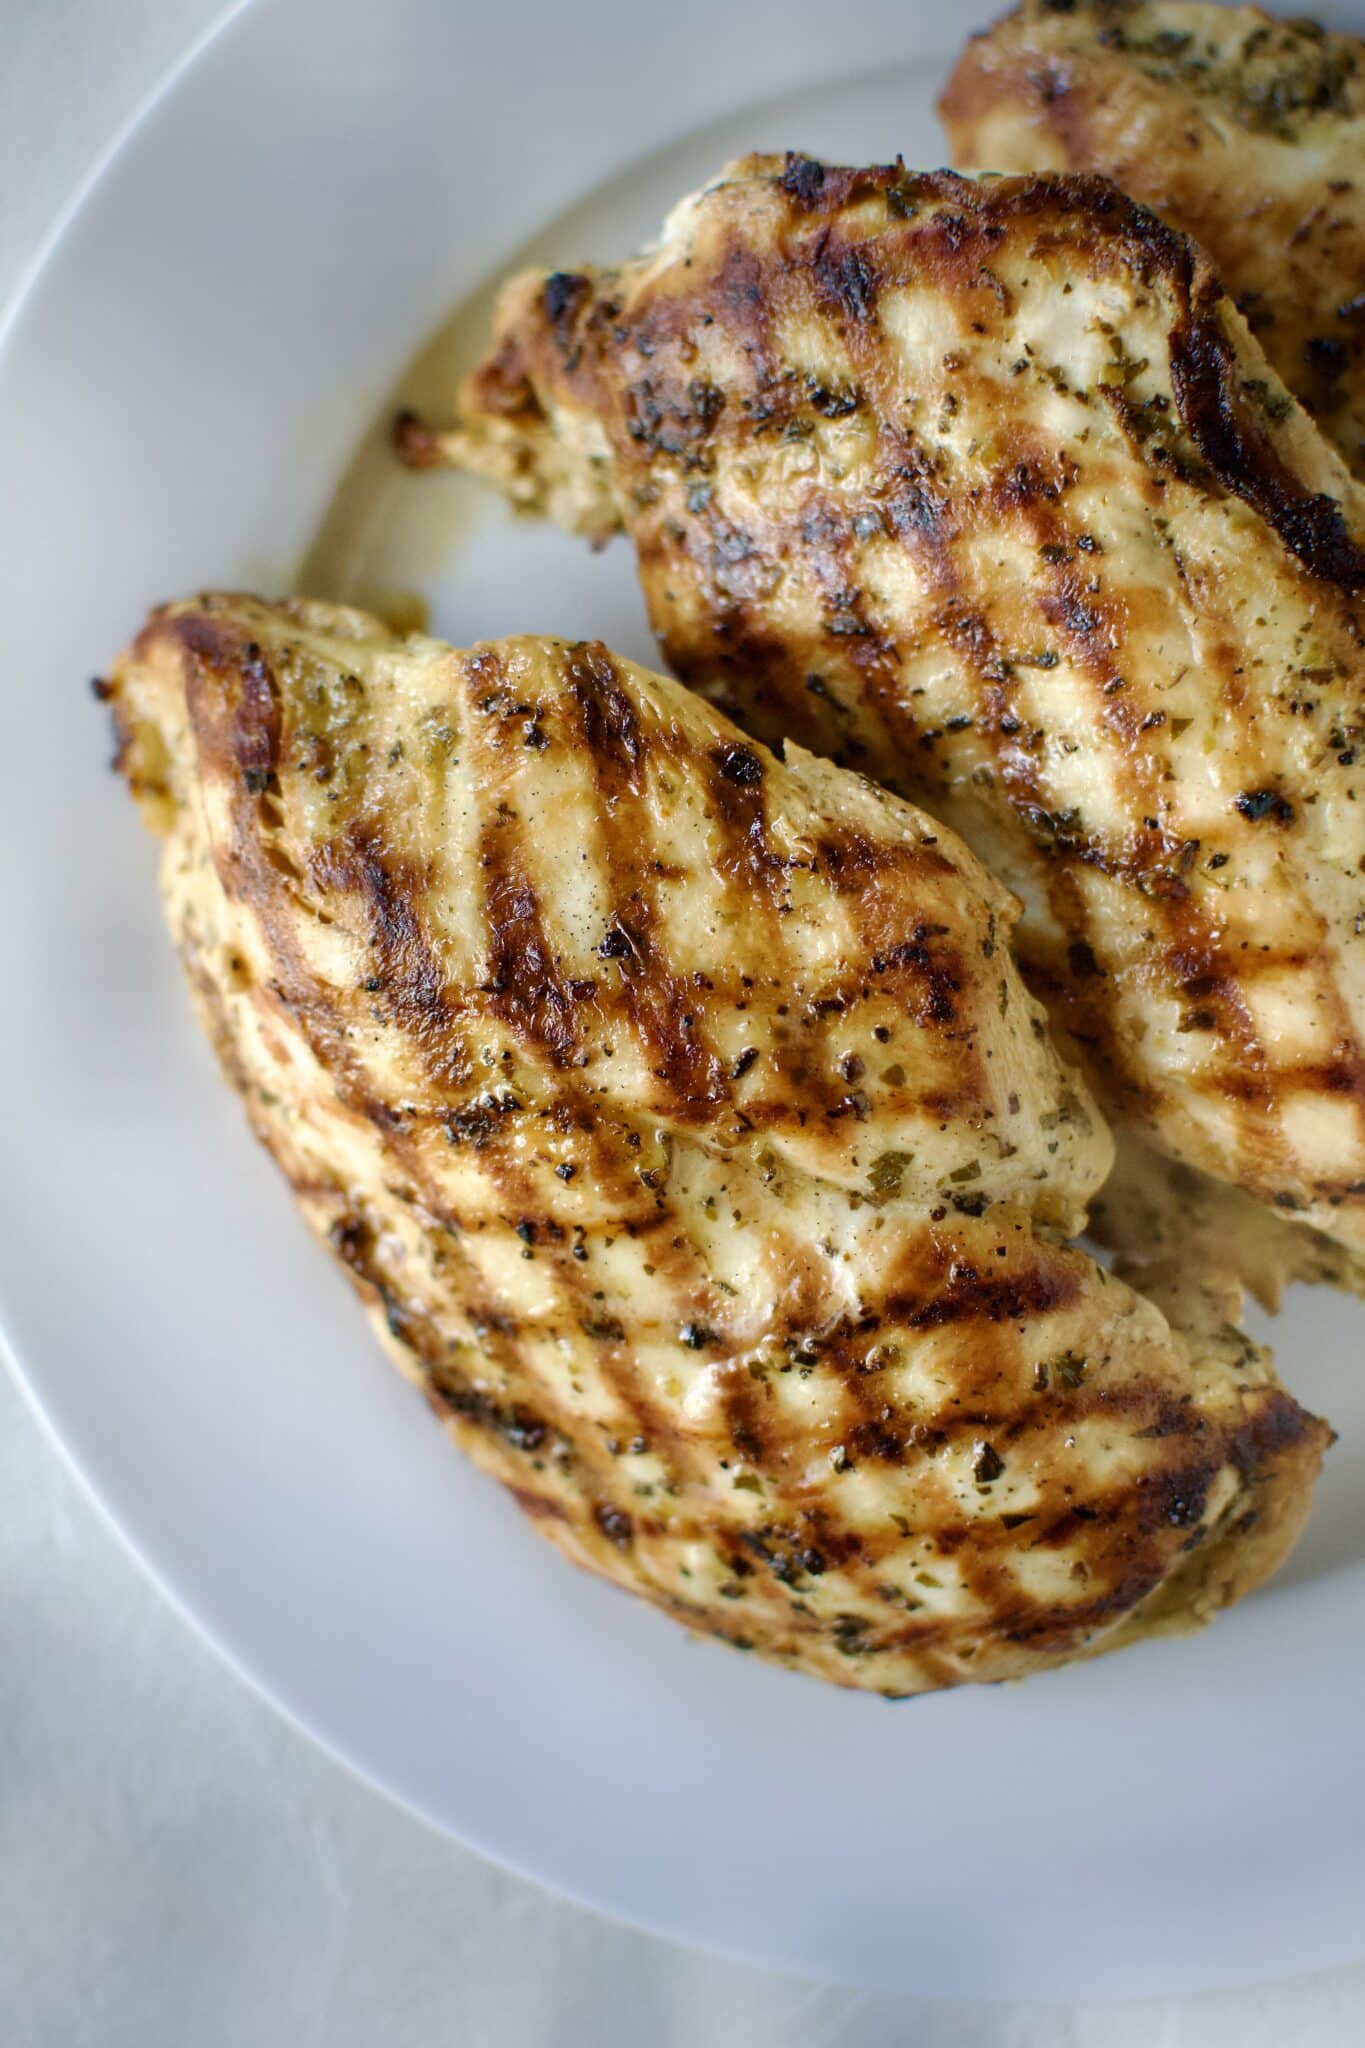 Italian Marinated chicken that has been grilled and is resting on a palate.